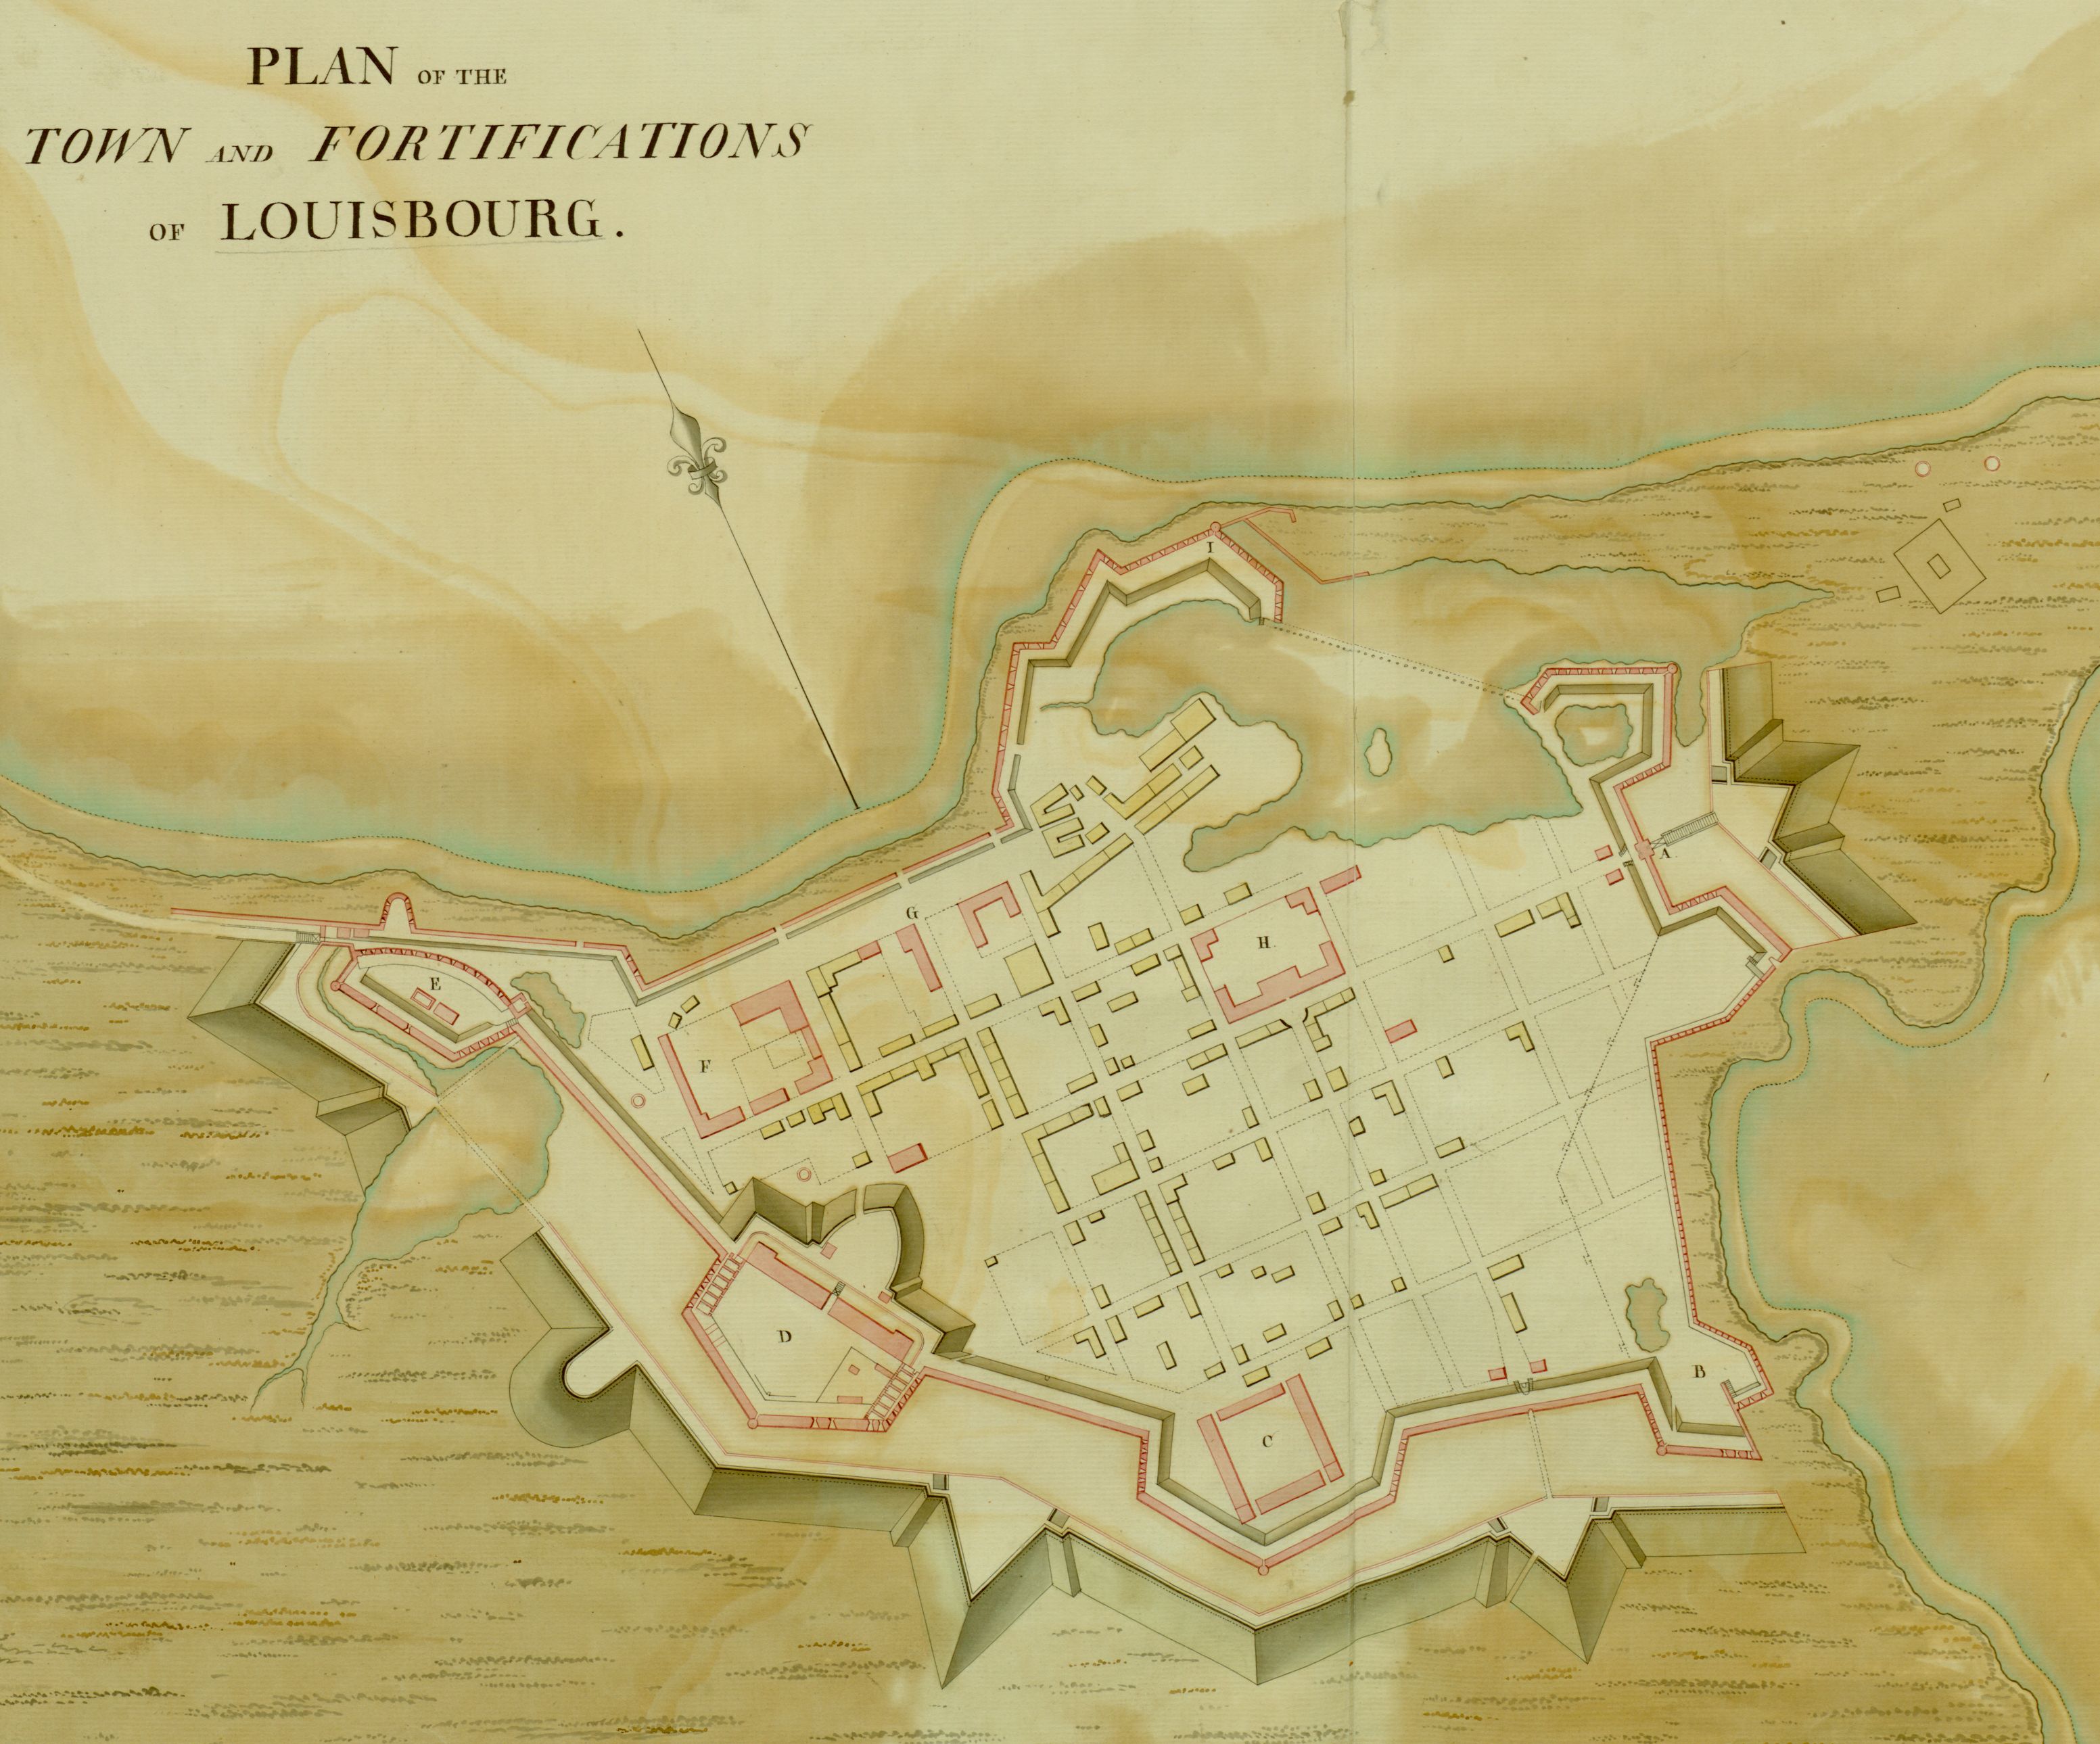 A 1745 map displaying the town and fortifications of Louisbourg